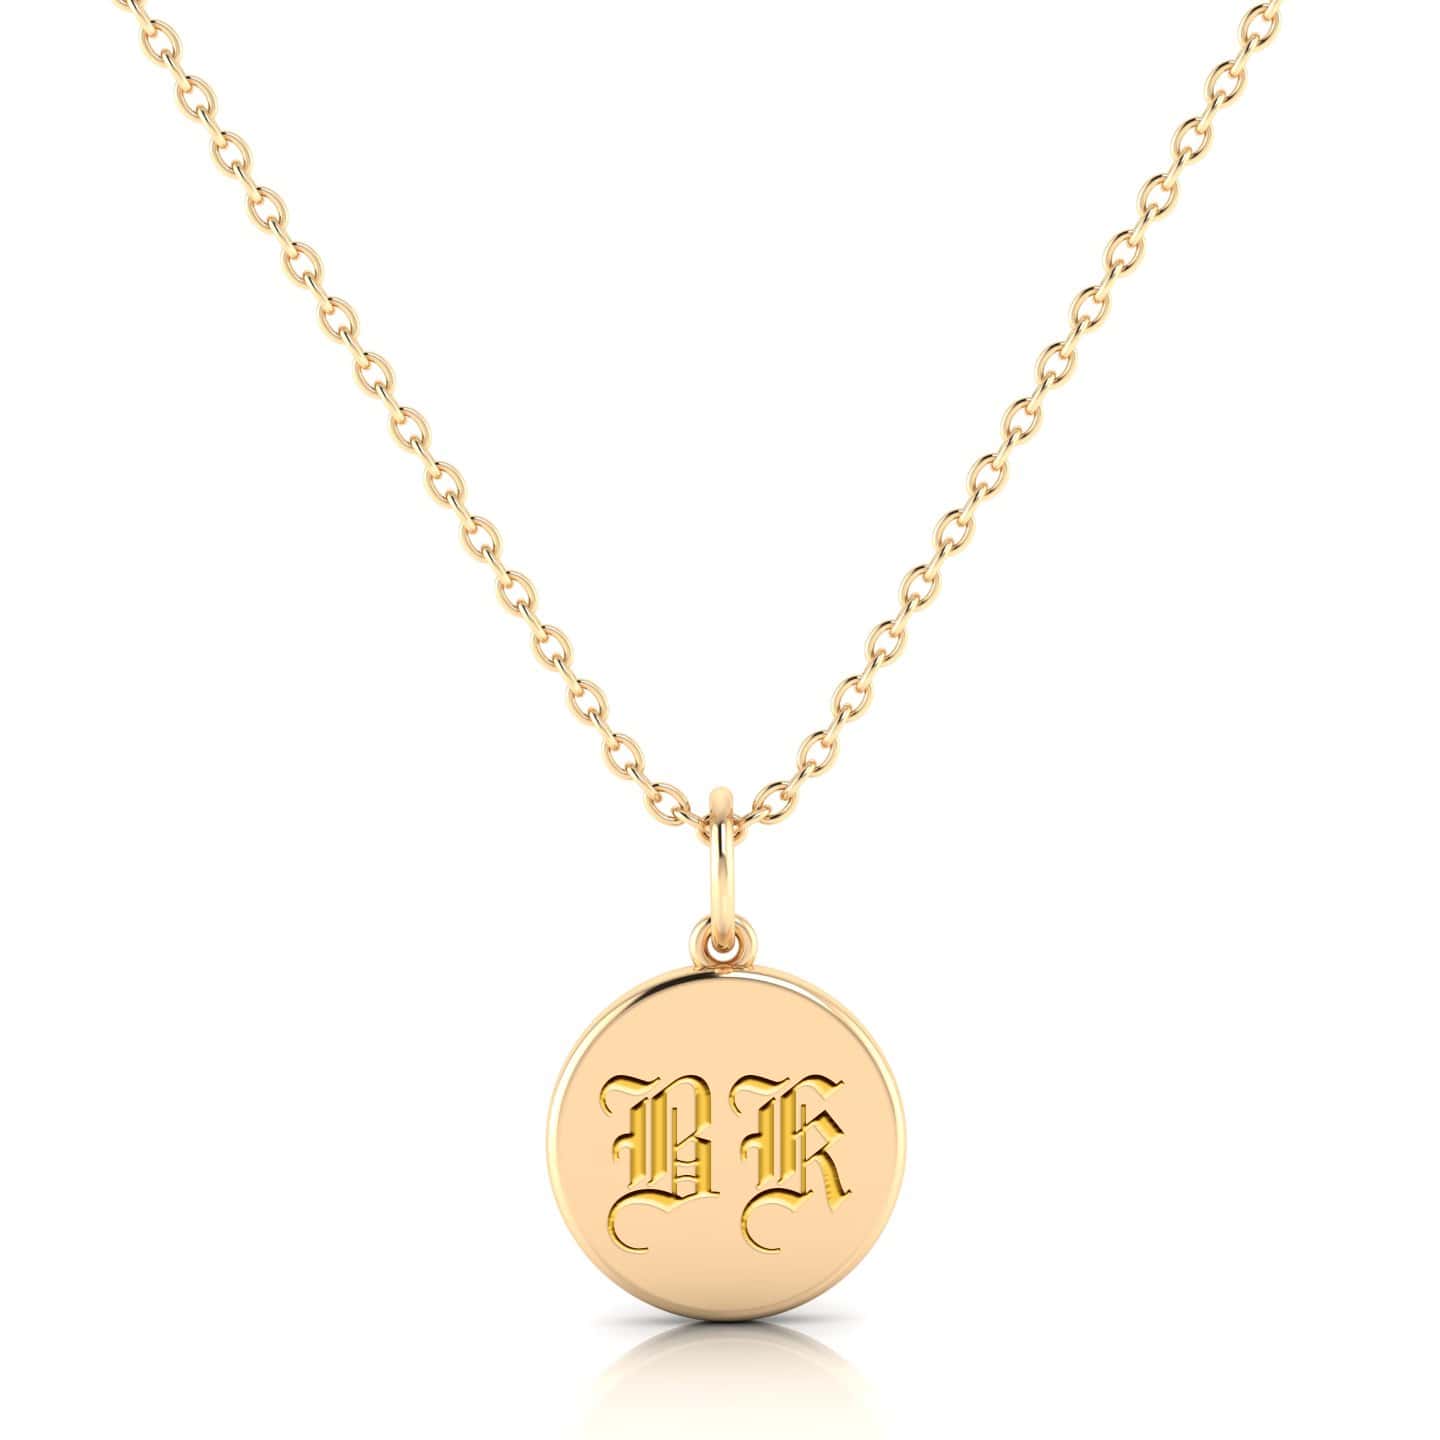 Yellow Gold Circle Pendant with custom engraving with Old English font